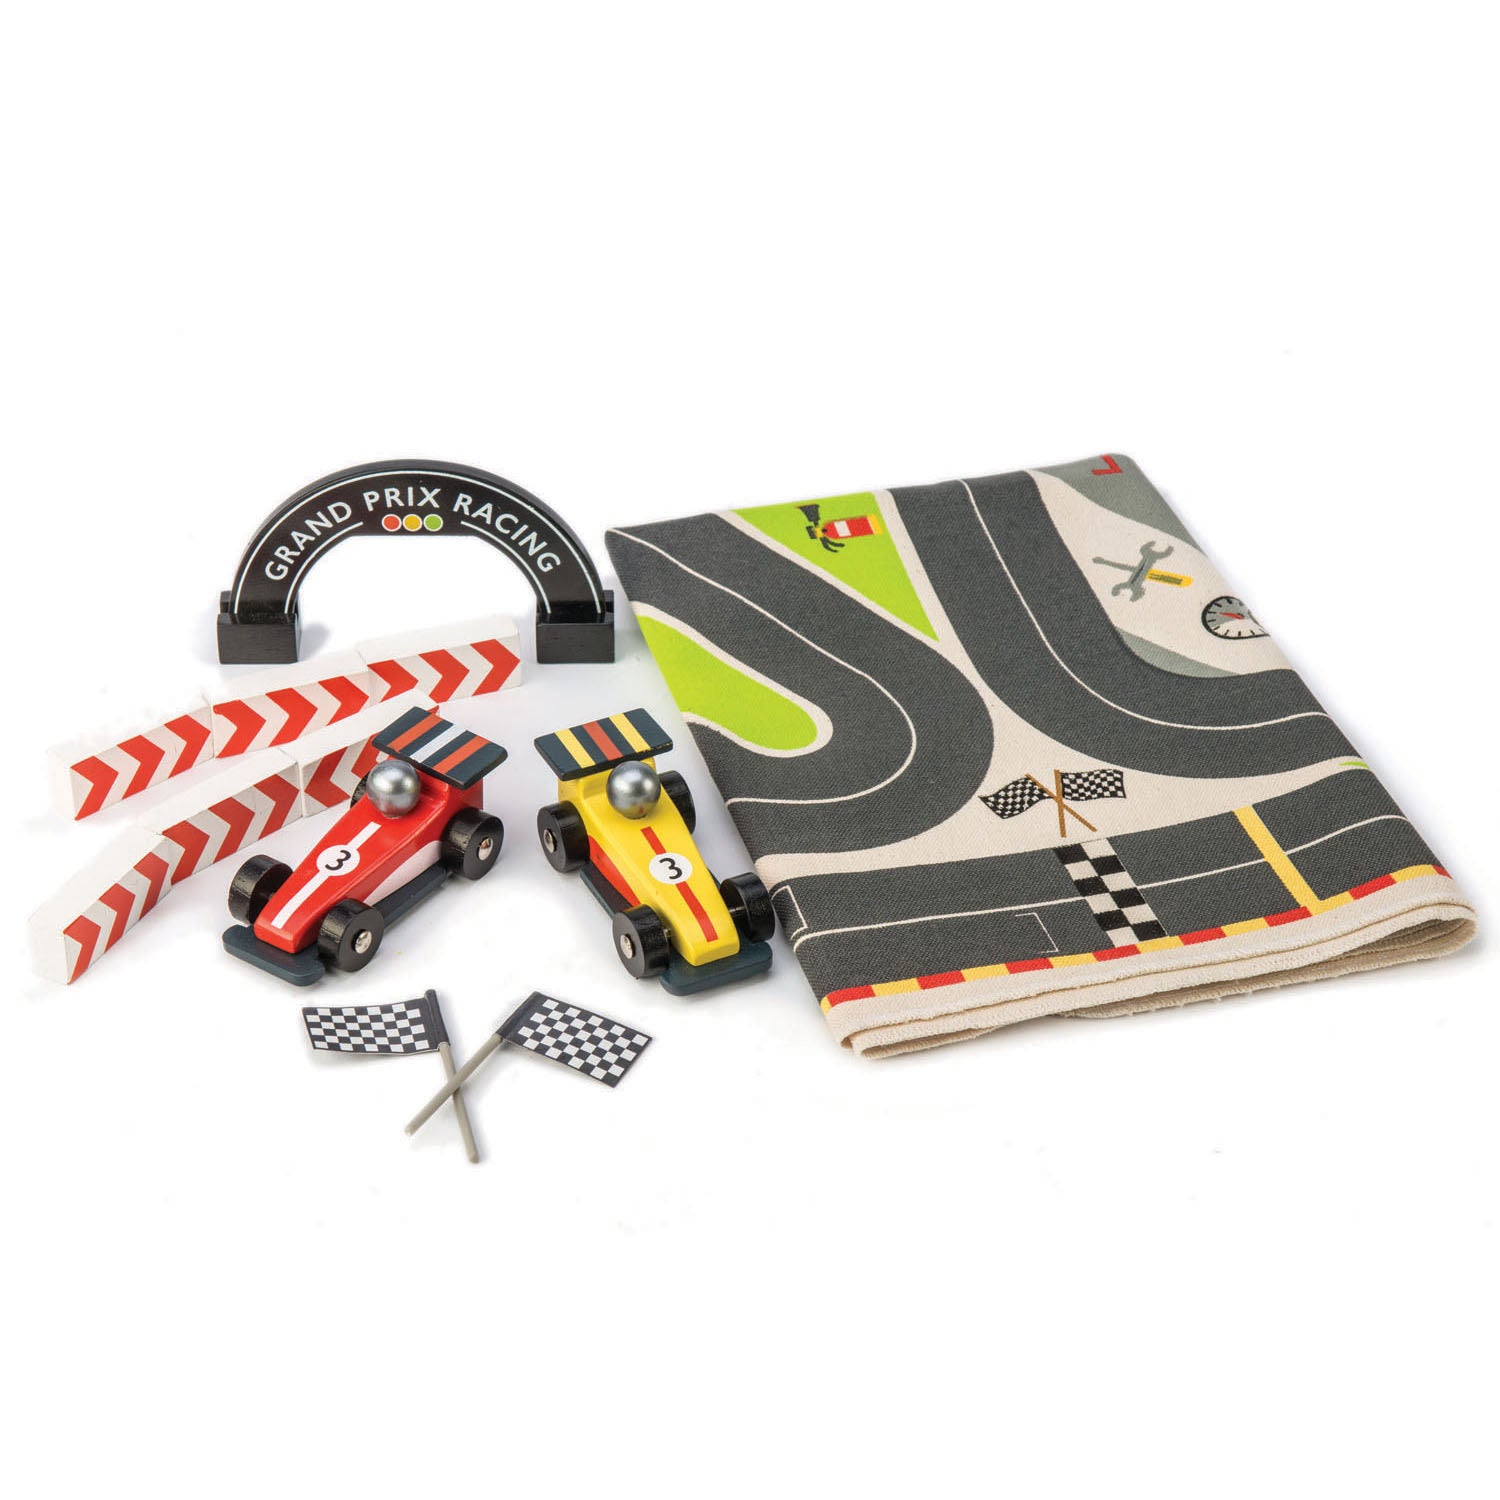 <p>Vroom vroom! Have fun playing with our Formula One Racing mat. Place the barricades, set the racing flags, and start a race! This set includes 2 colored wooden formula one cars, a finishing line, 2 racing flags and 6 barricades and a beautifully printed canvas playmat. </p>
<p>Age range: 3 Years And Older  </p>
<p>Product size: 28.35&quot; x 20.08&quot; x 2.72&quot;  </p>
<p>Weight: 0.66 lbs</p>
